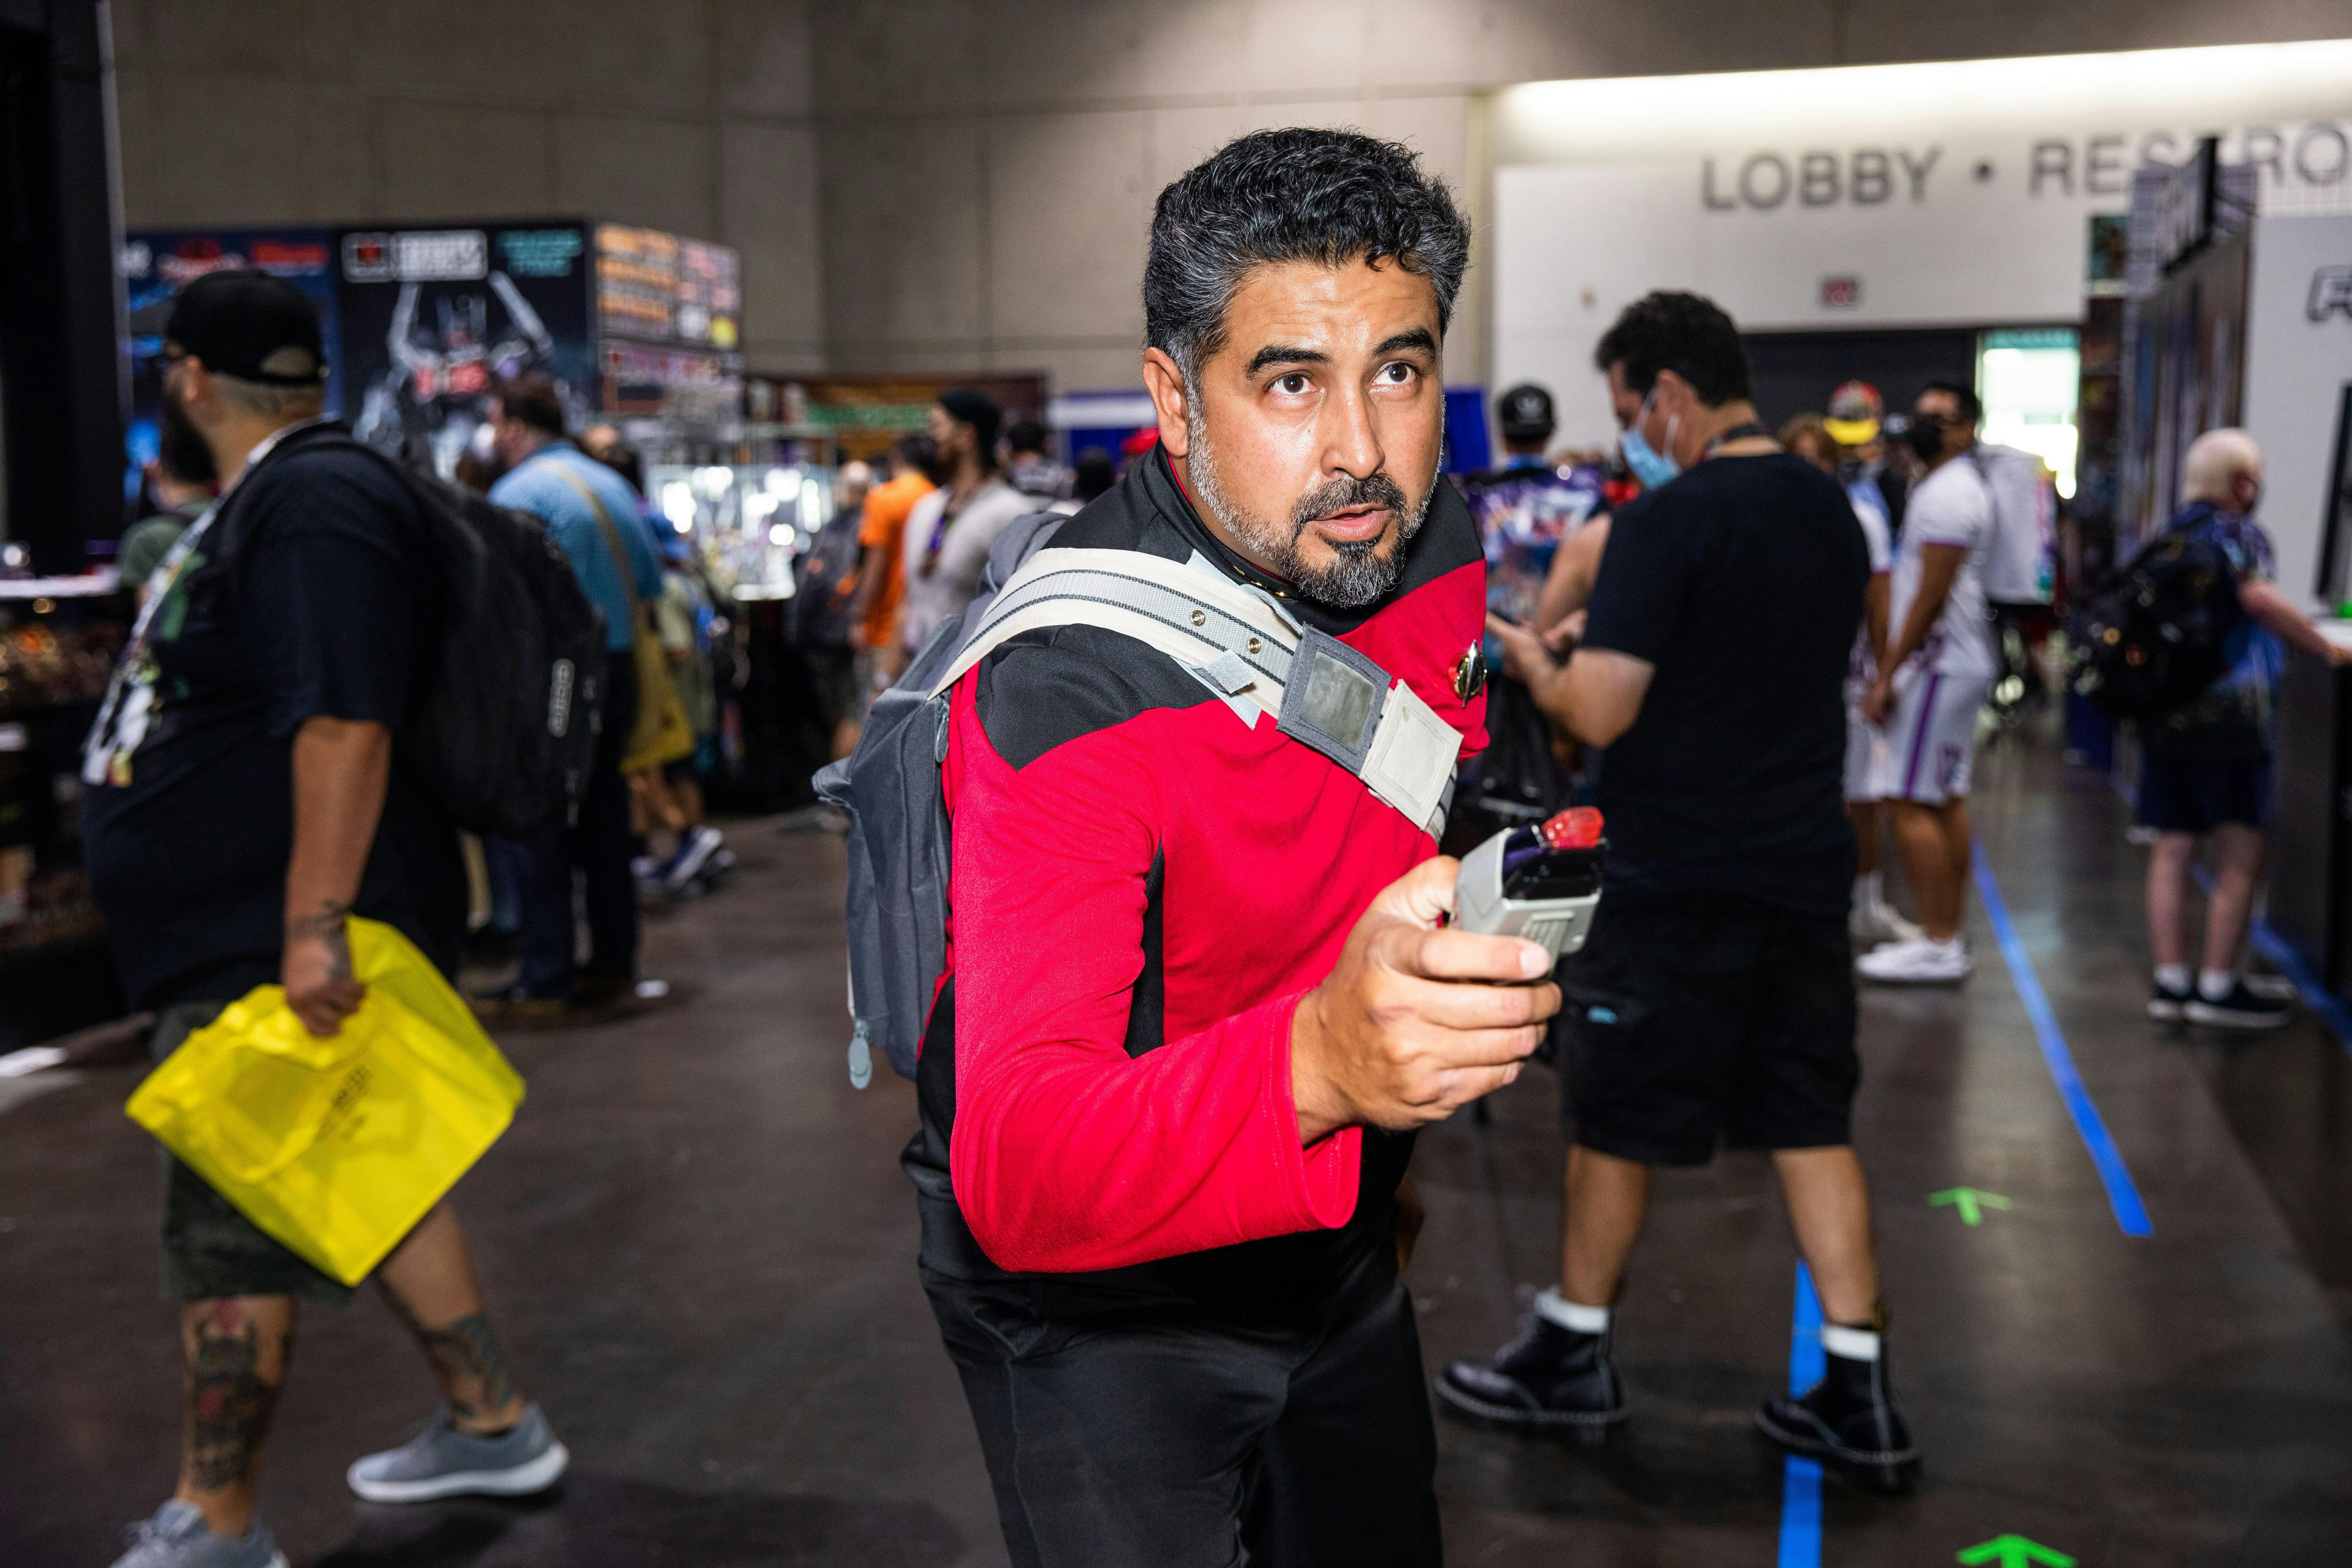 A cosplayer is ready for action as he poses with a phaser.